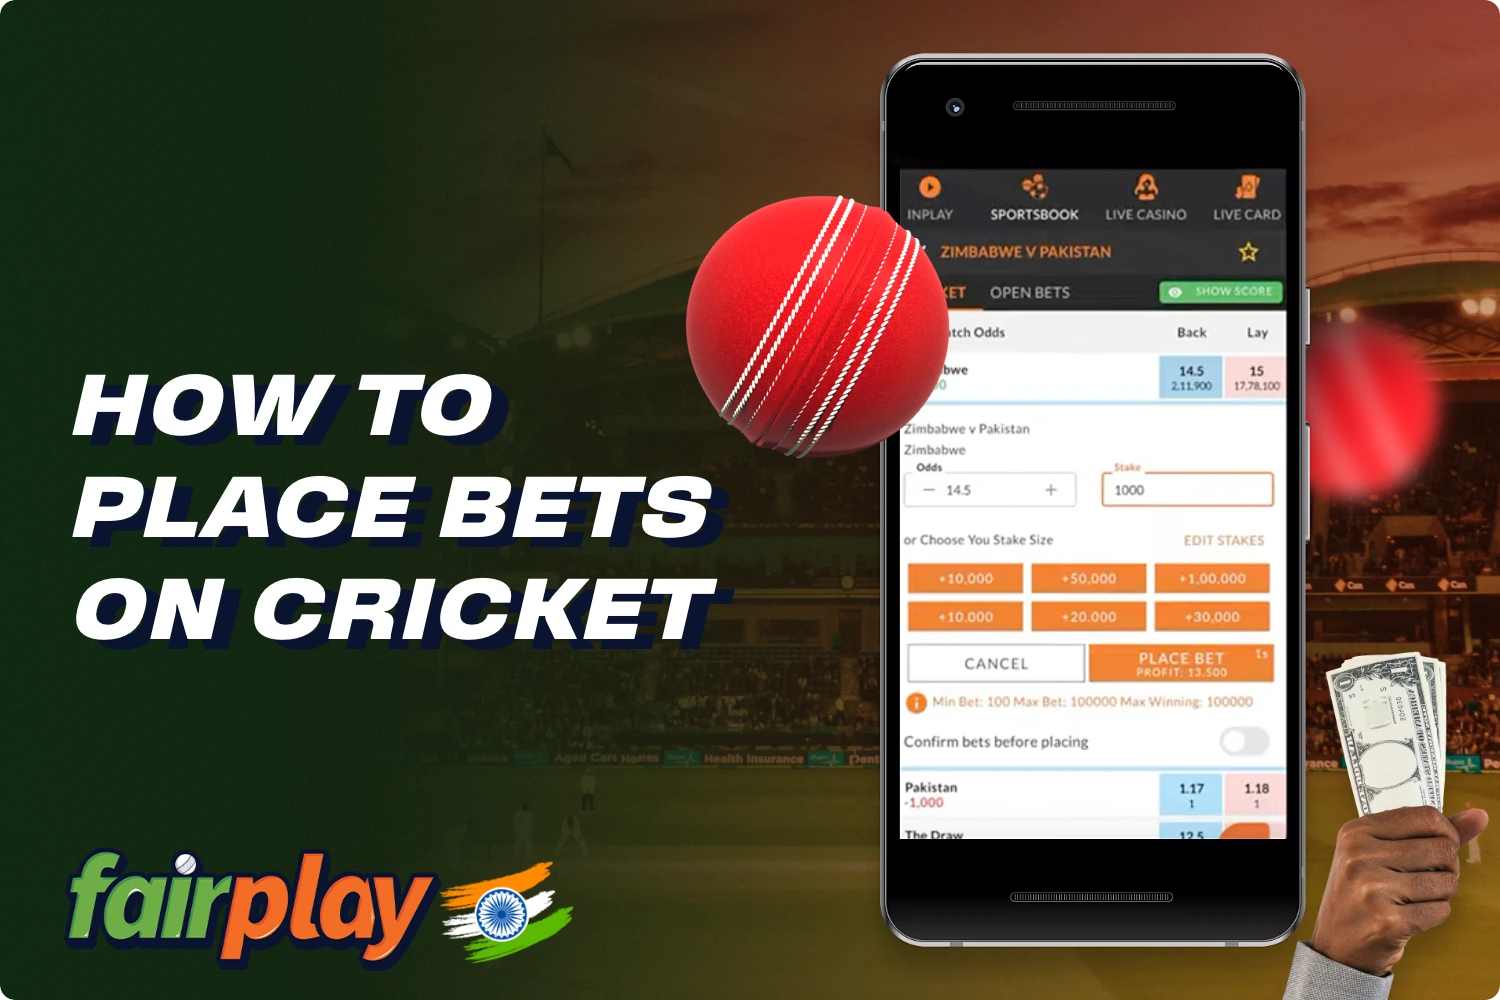 In order to bet on cricket at Fireplay you need to create an account, make a deposit and select the match you want to bet on